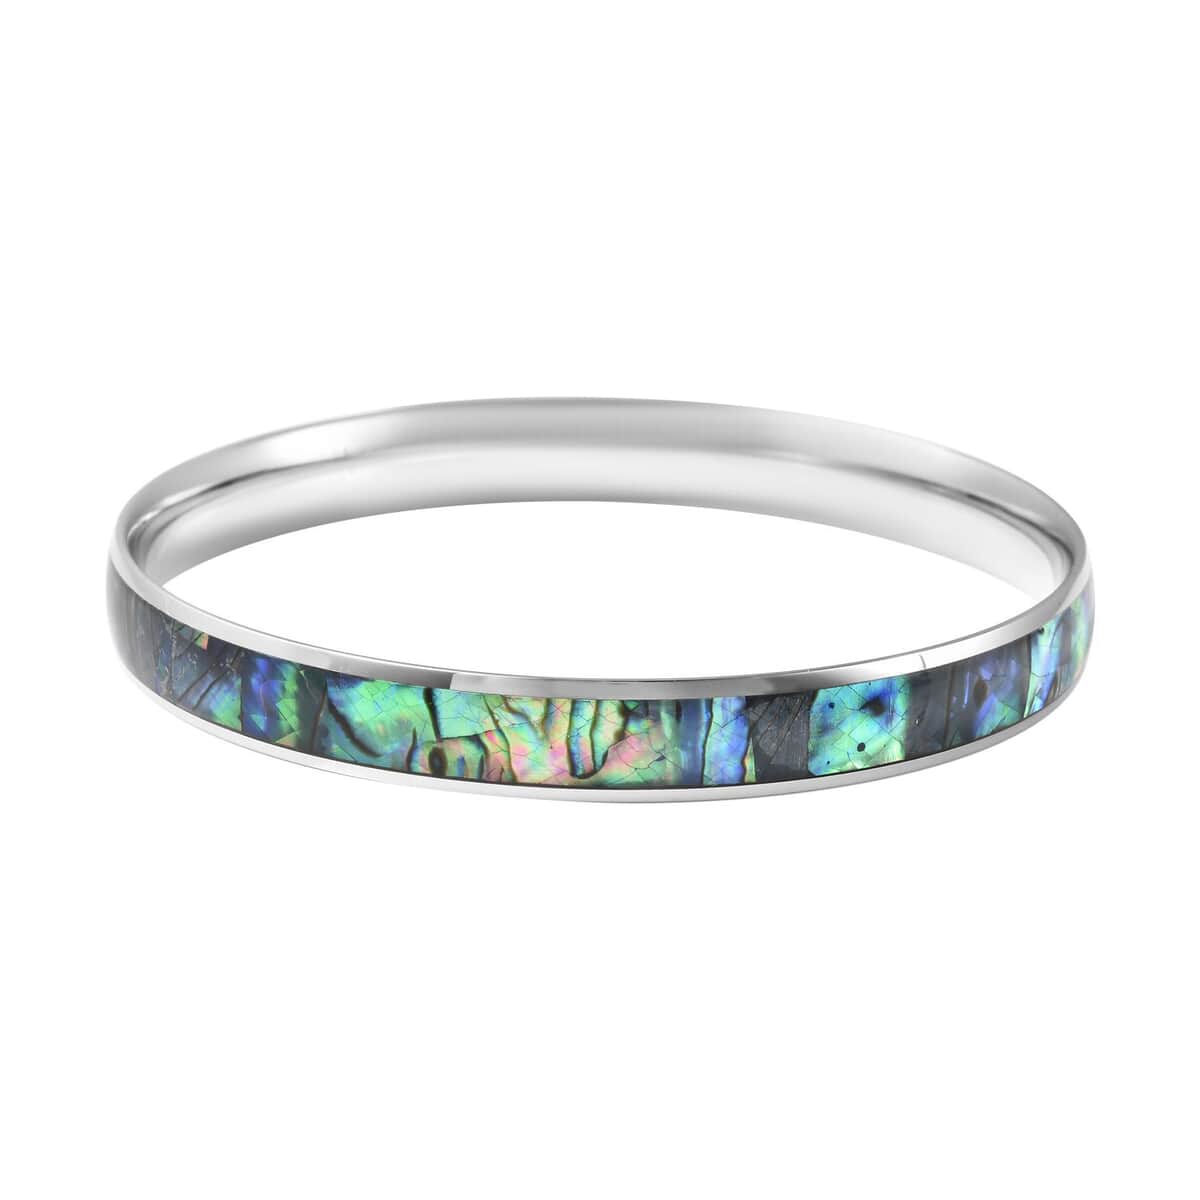 Abalone Shell Bangle Bracelet in Stainless Steel, Enamel Bracelet, Fashion Beach Jewelry For Women, Gift For Her (7.25 In) image number 3